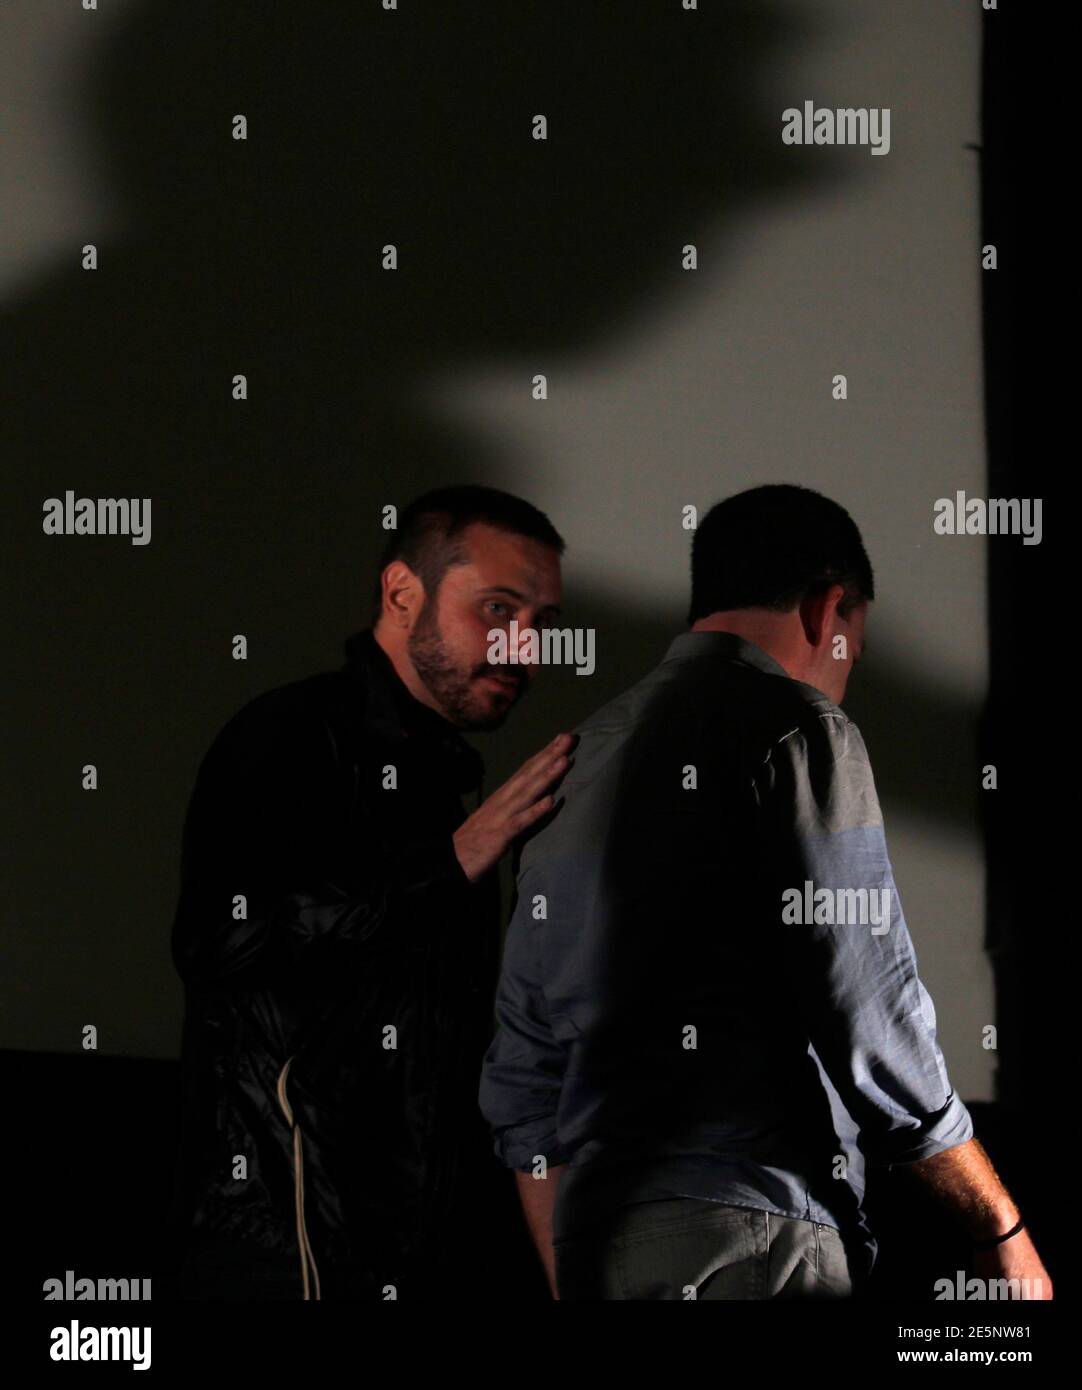 U.S. journalists Jeremy Scahill (L) and Glenn Greenwald leave the room after the presentation of the documentary film 'Dirty Wars' during the Rio Film Festival in Rio de Janeiro September 28, 2013. REUTERS/Pilar Olivares (BRAZIL - Tags: ENTERTAINMENT) Stock Photo